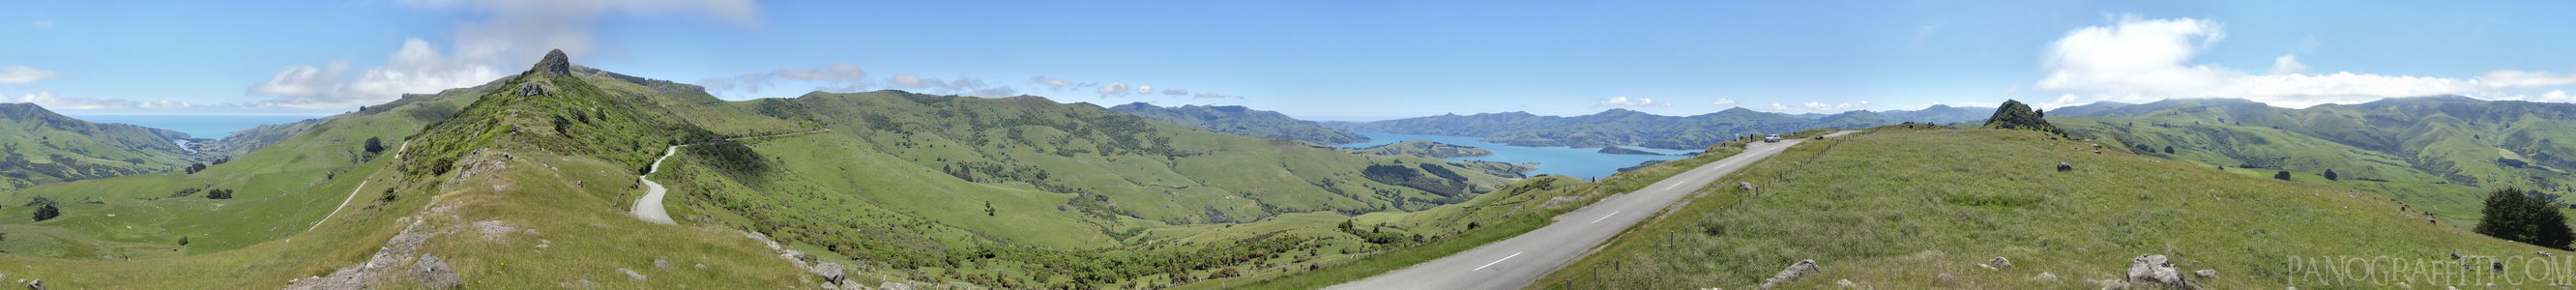 Banks Peninsula from Summit Road - A view of both the Akaroa Harbour and Pacific Ocean is possible from the top of Summit Road.  This 360 degree view is rendered in HDR from bracketed shots.